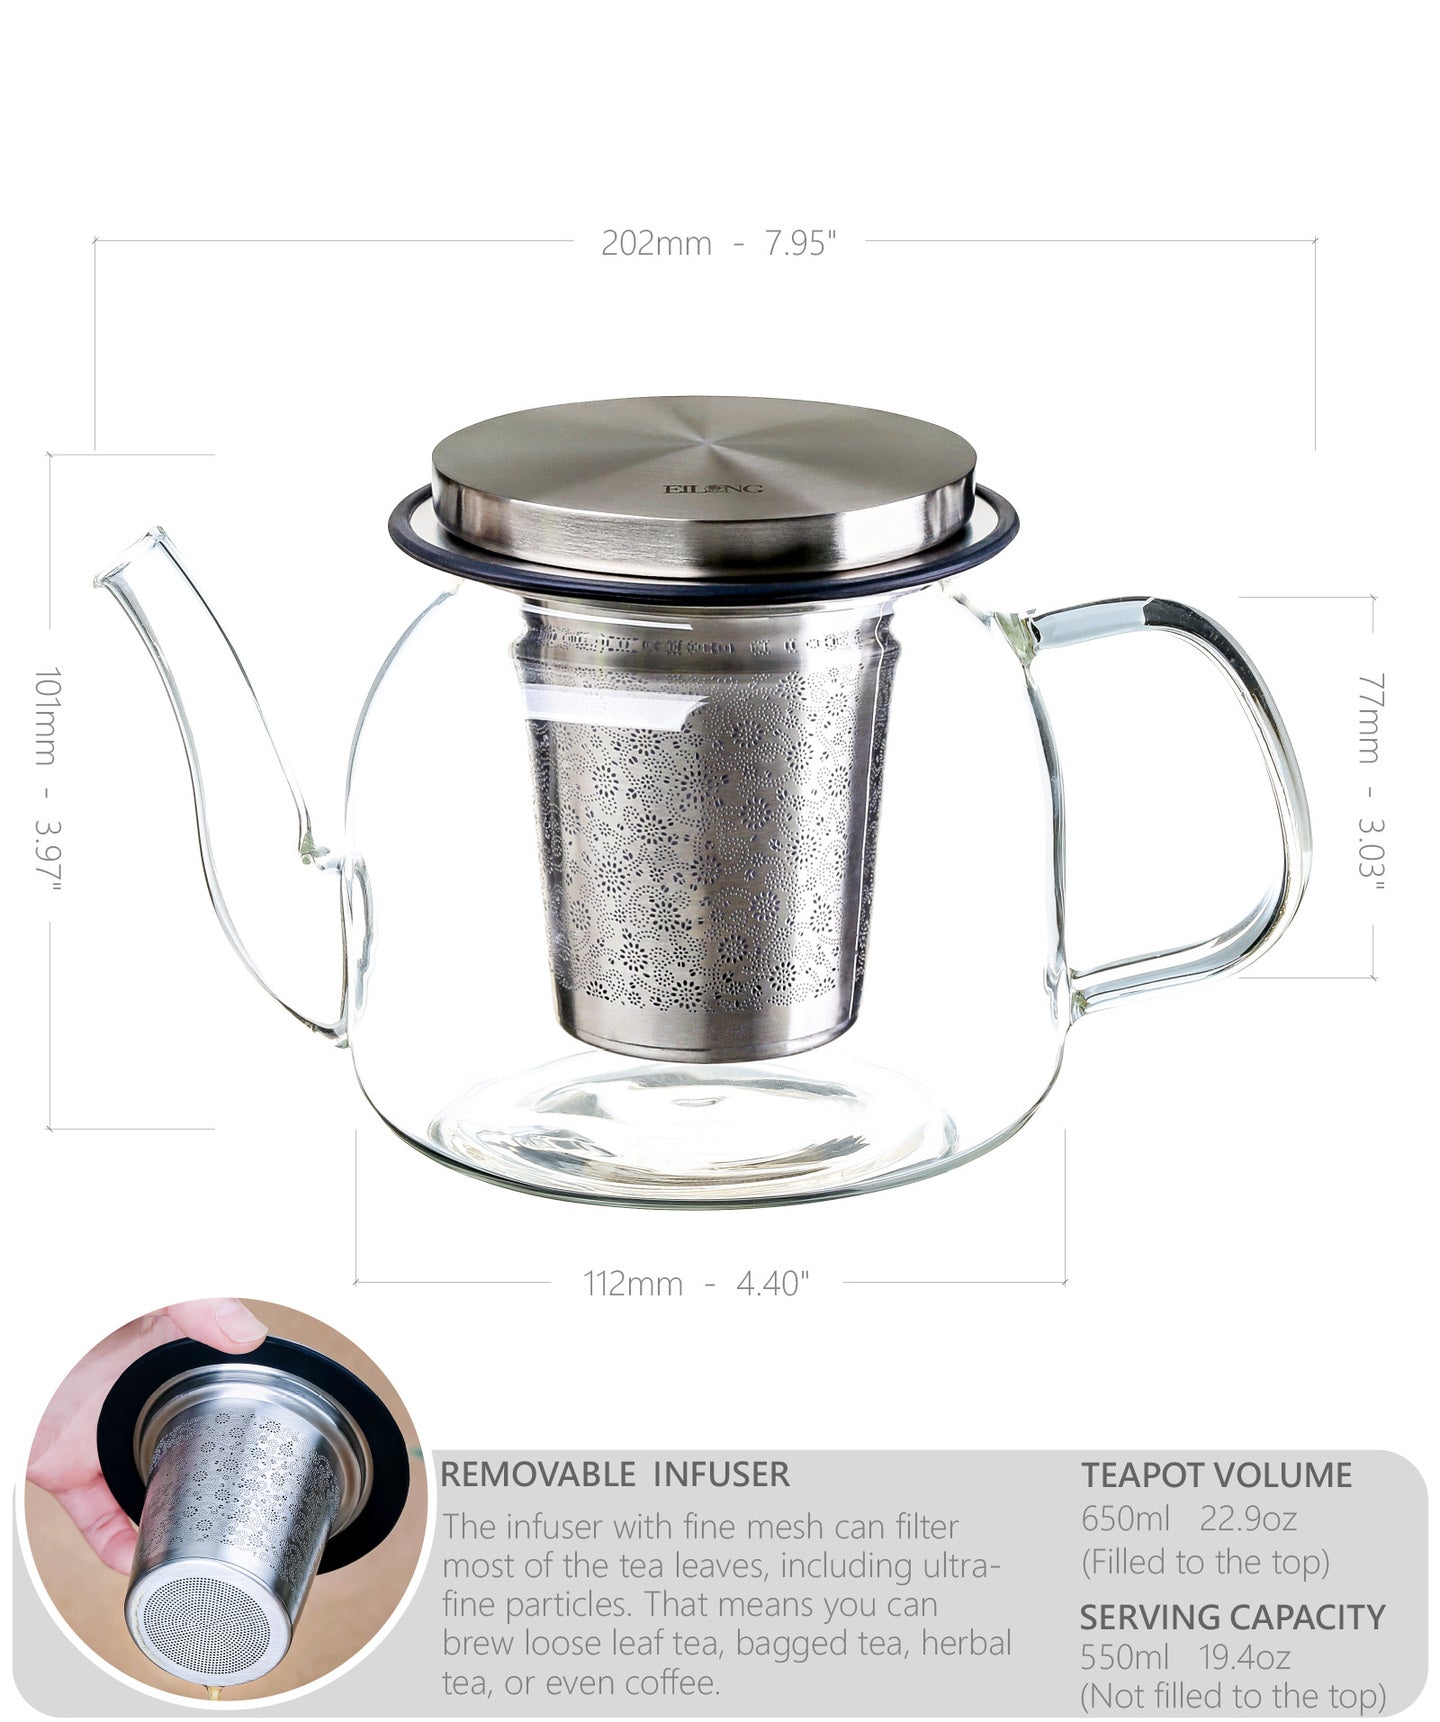 Tea Making Pot Small Stainless Steel Teapot Double Walled Insulated Teapot